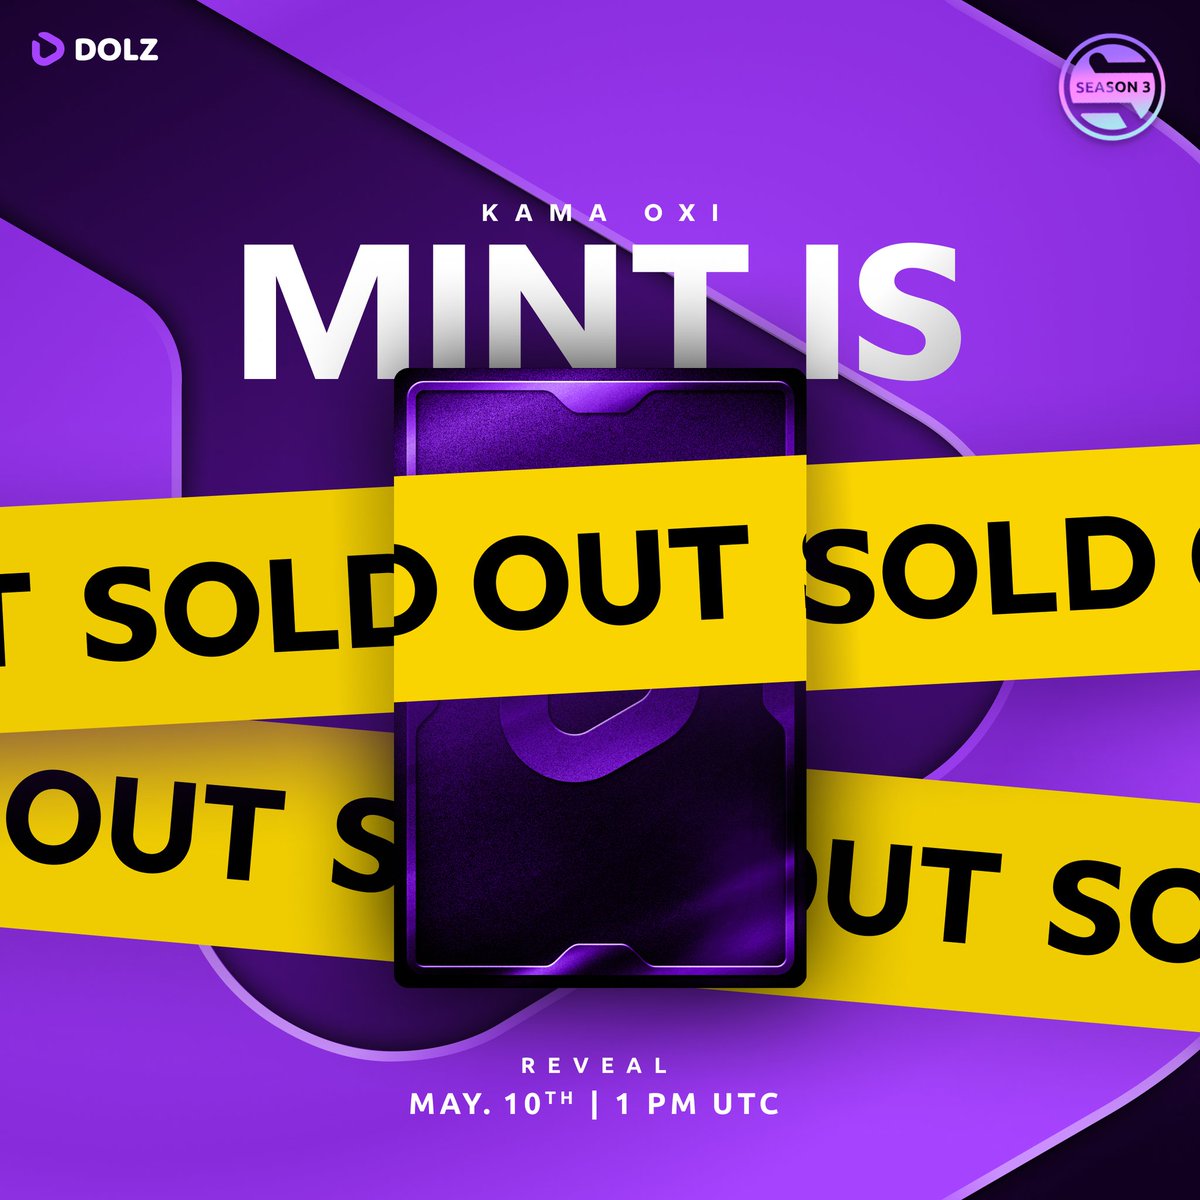 💥 Already SOLD OUT! REVEAL | May 10th at 1 PM UTC @kama_oxi's XR card has been SOLD OUT within 2 minutes! You can already trade your #NFTs on the brand new $DOLZ Marketplace! ✨️